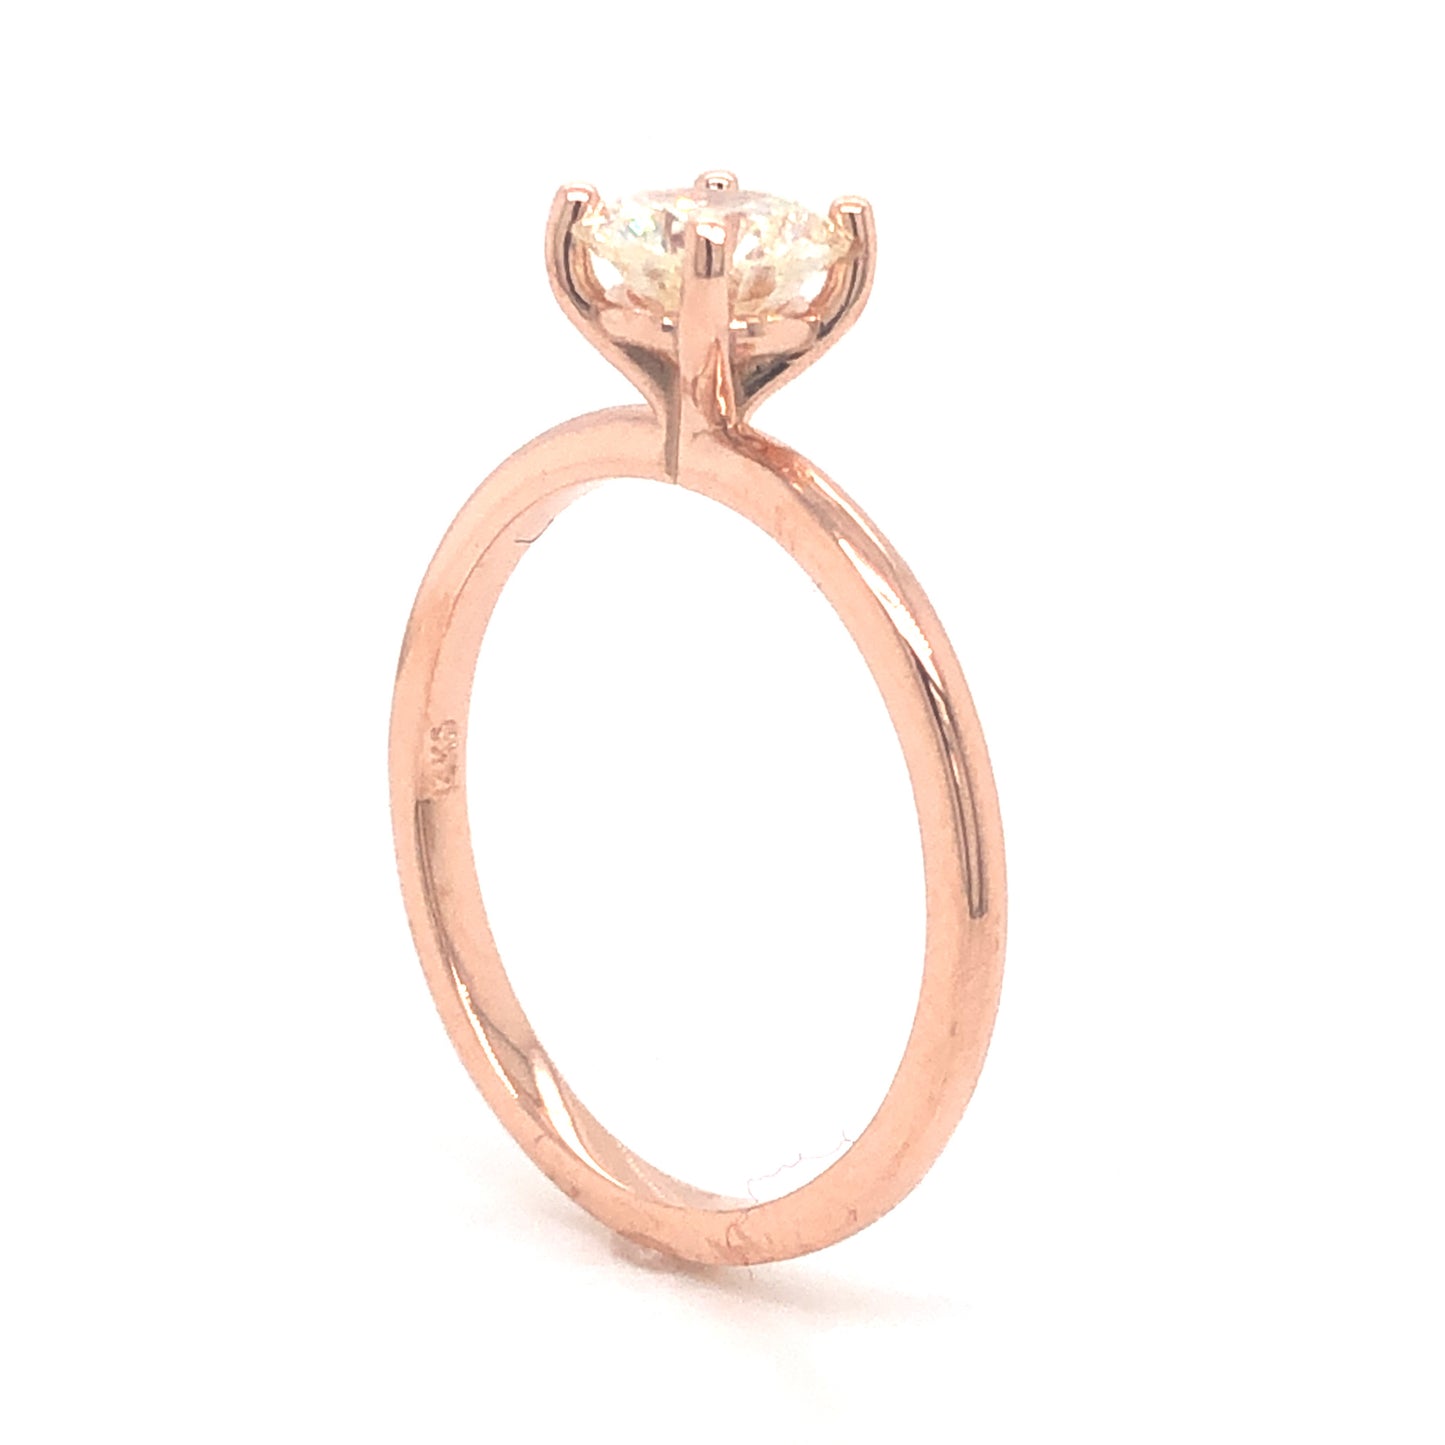 .80 Solitaire Diamond Engagement Ring in 14k Rose Gold